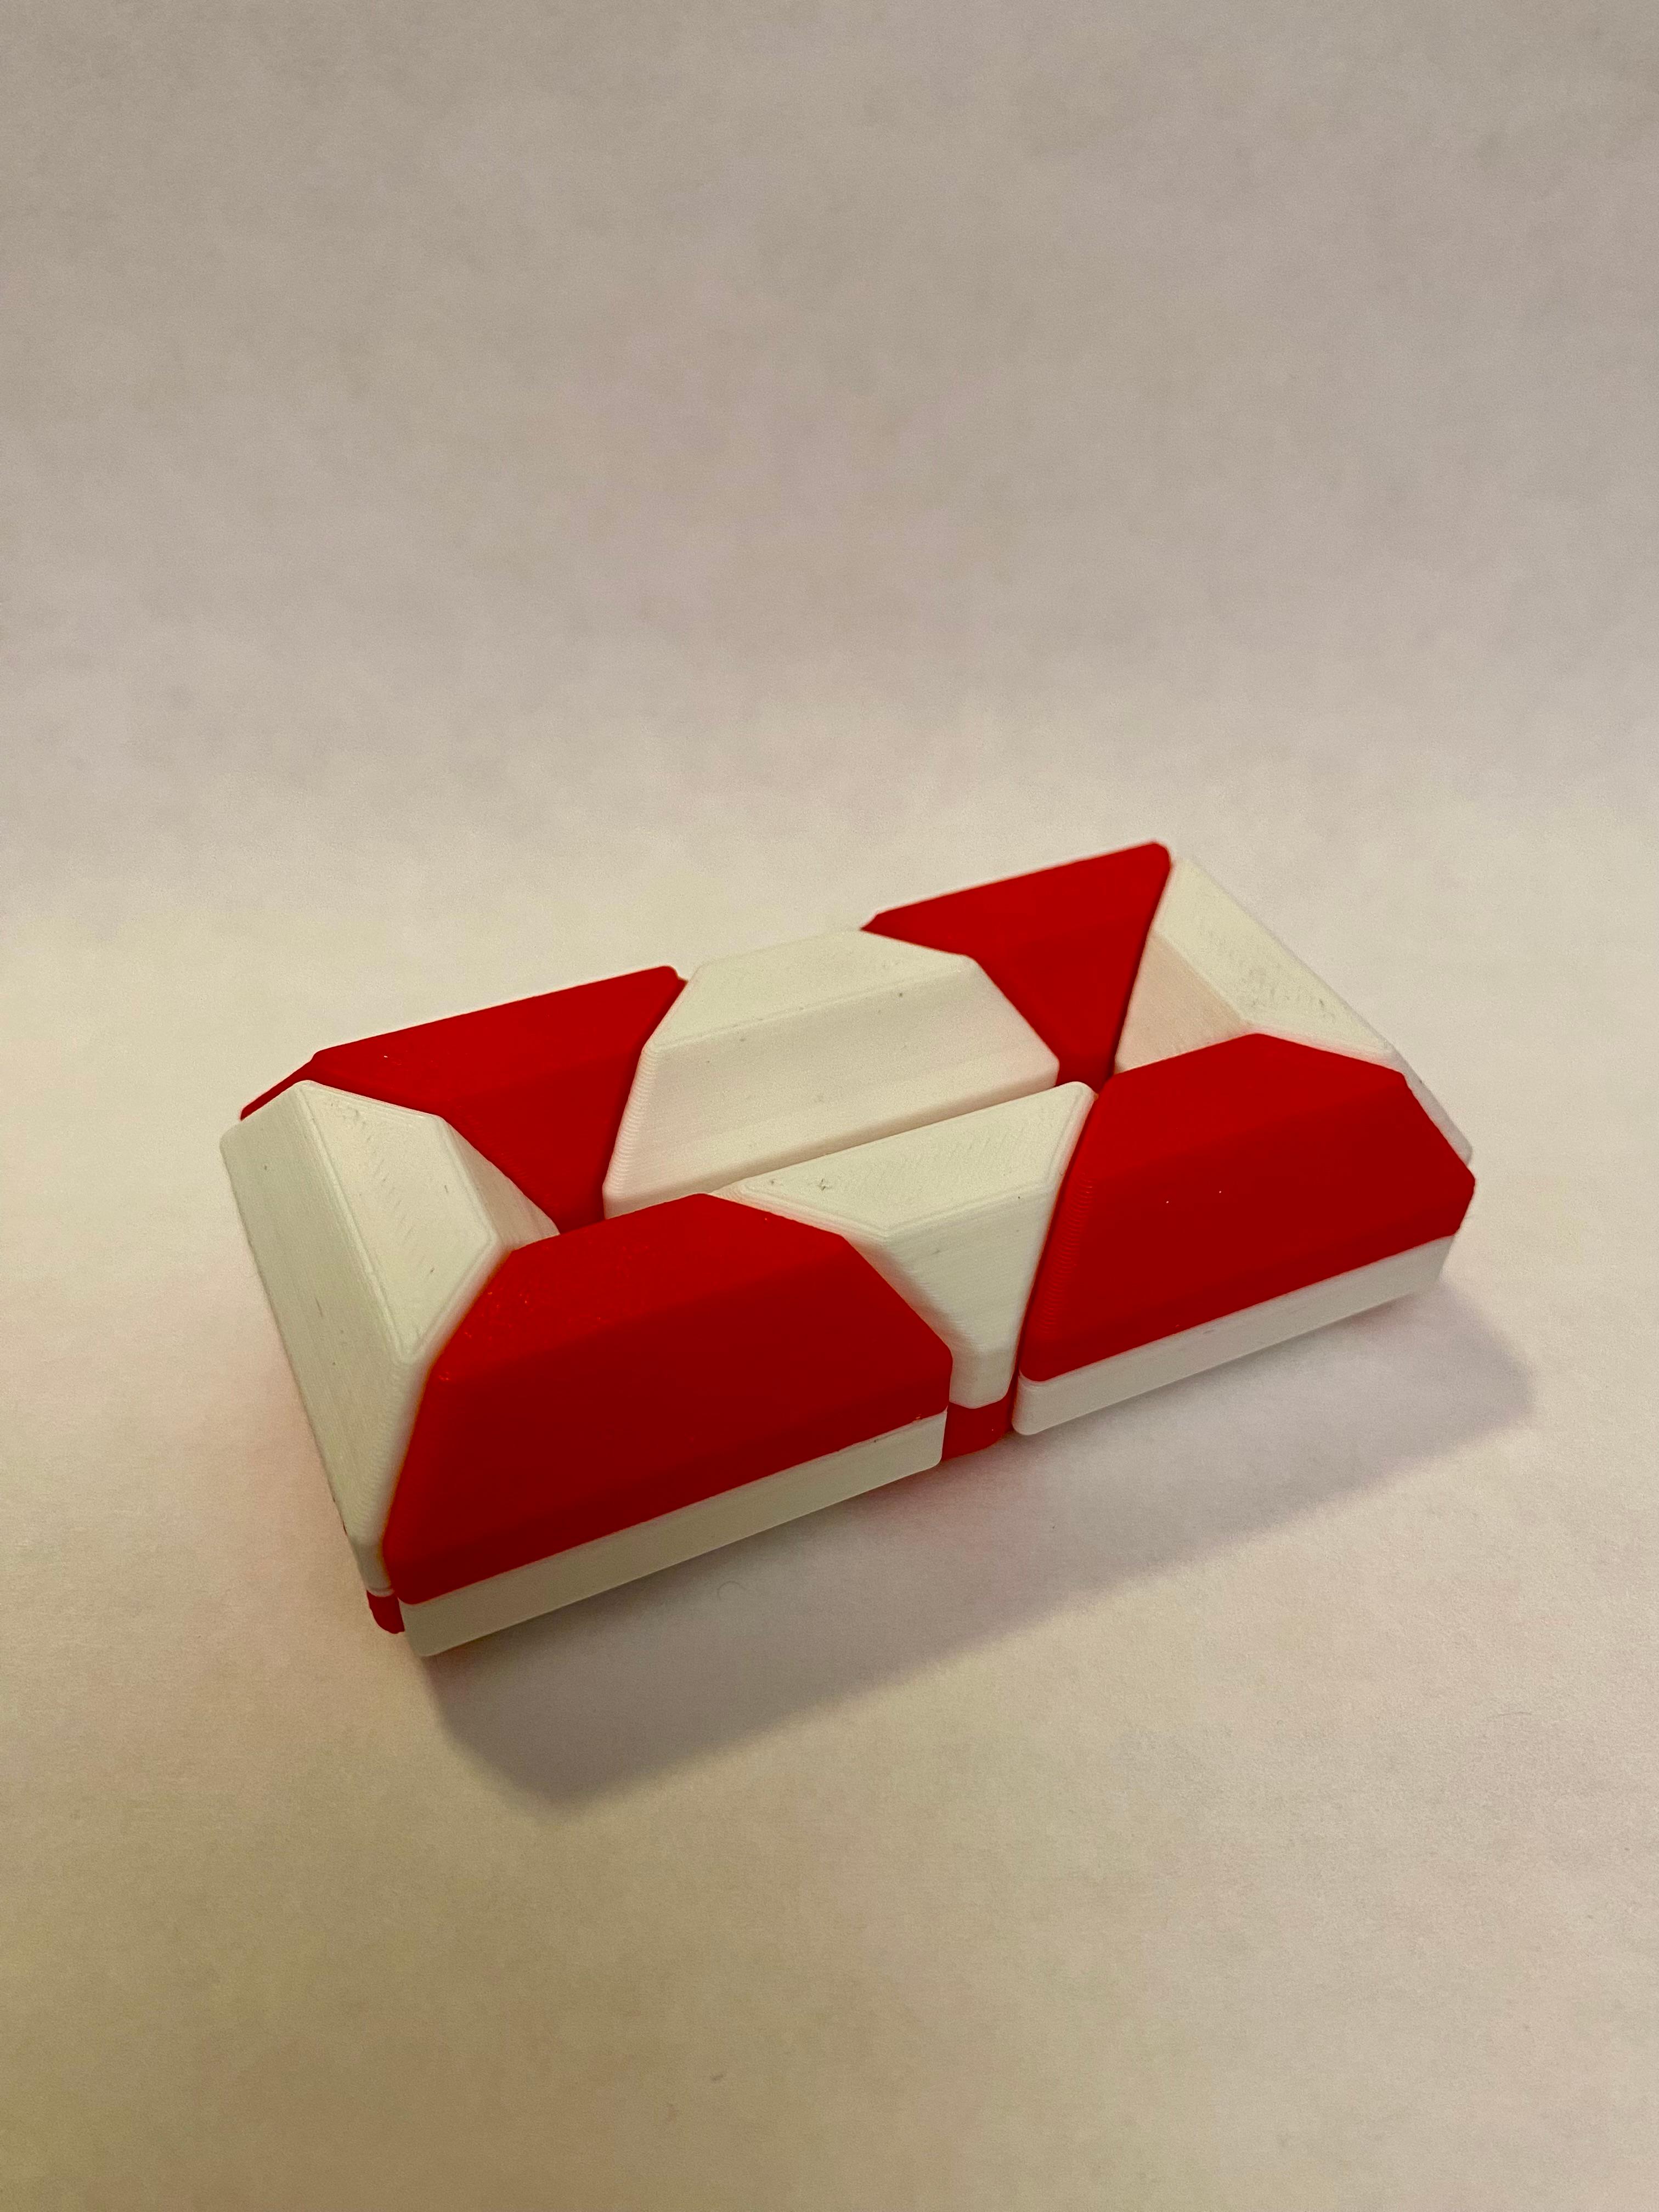 OctaTwist Fidget Toy - Overture PLA+ in white and red - 3d model